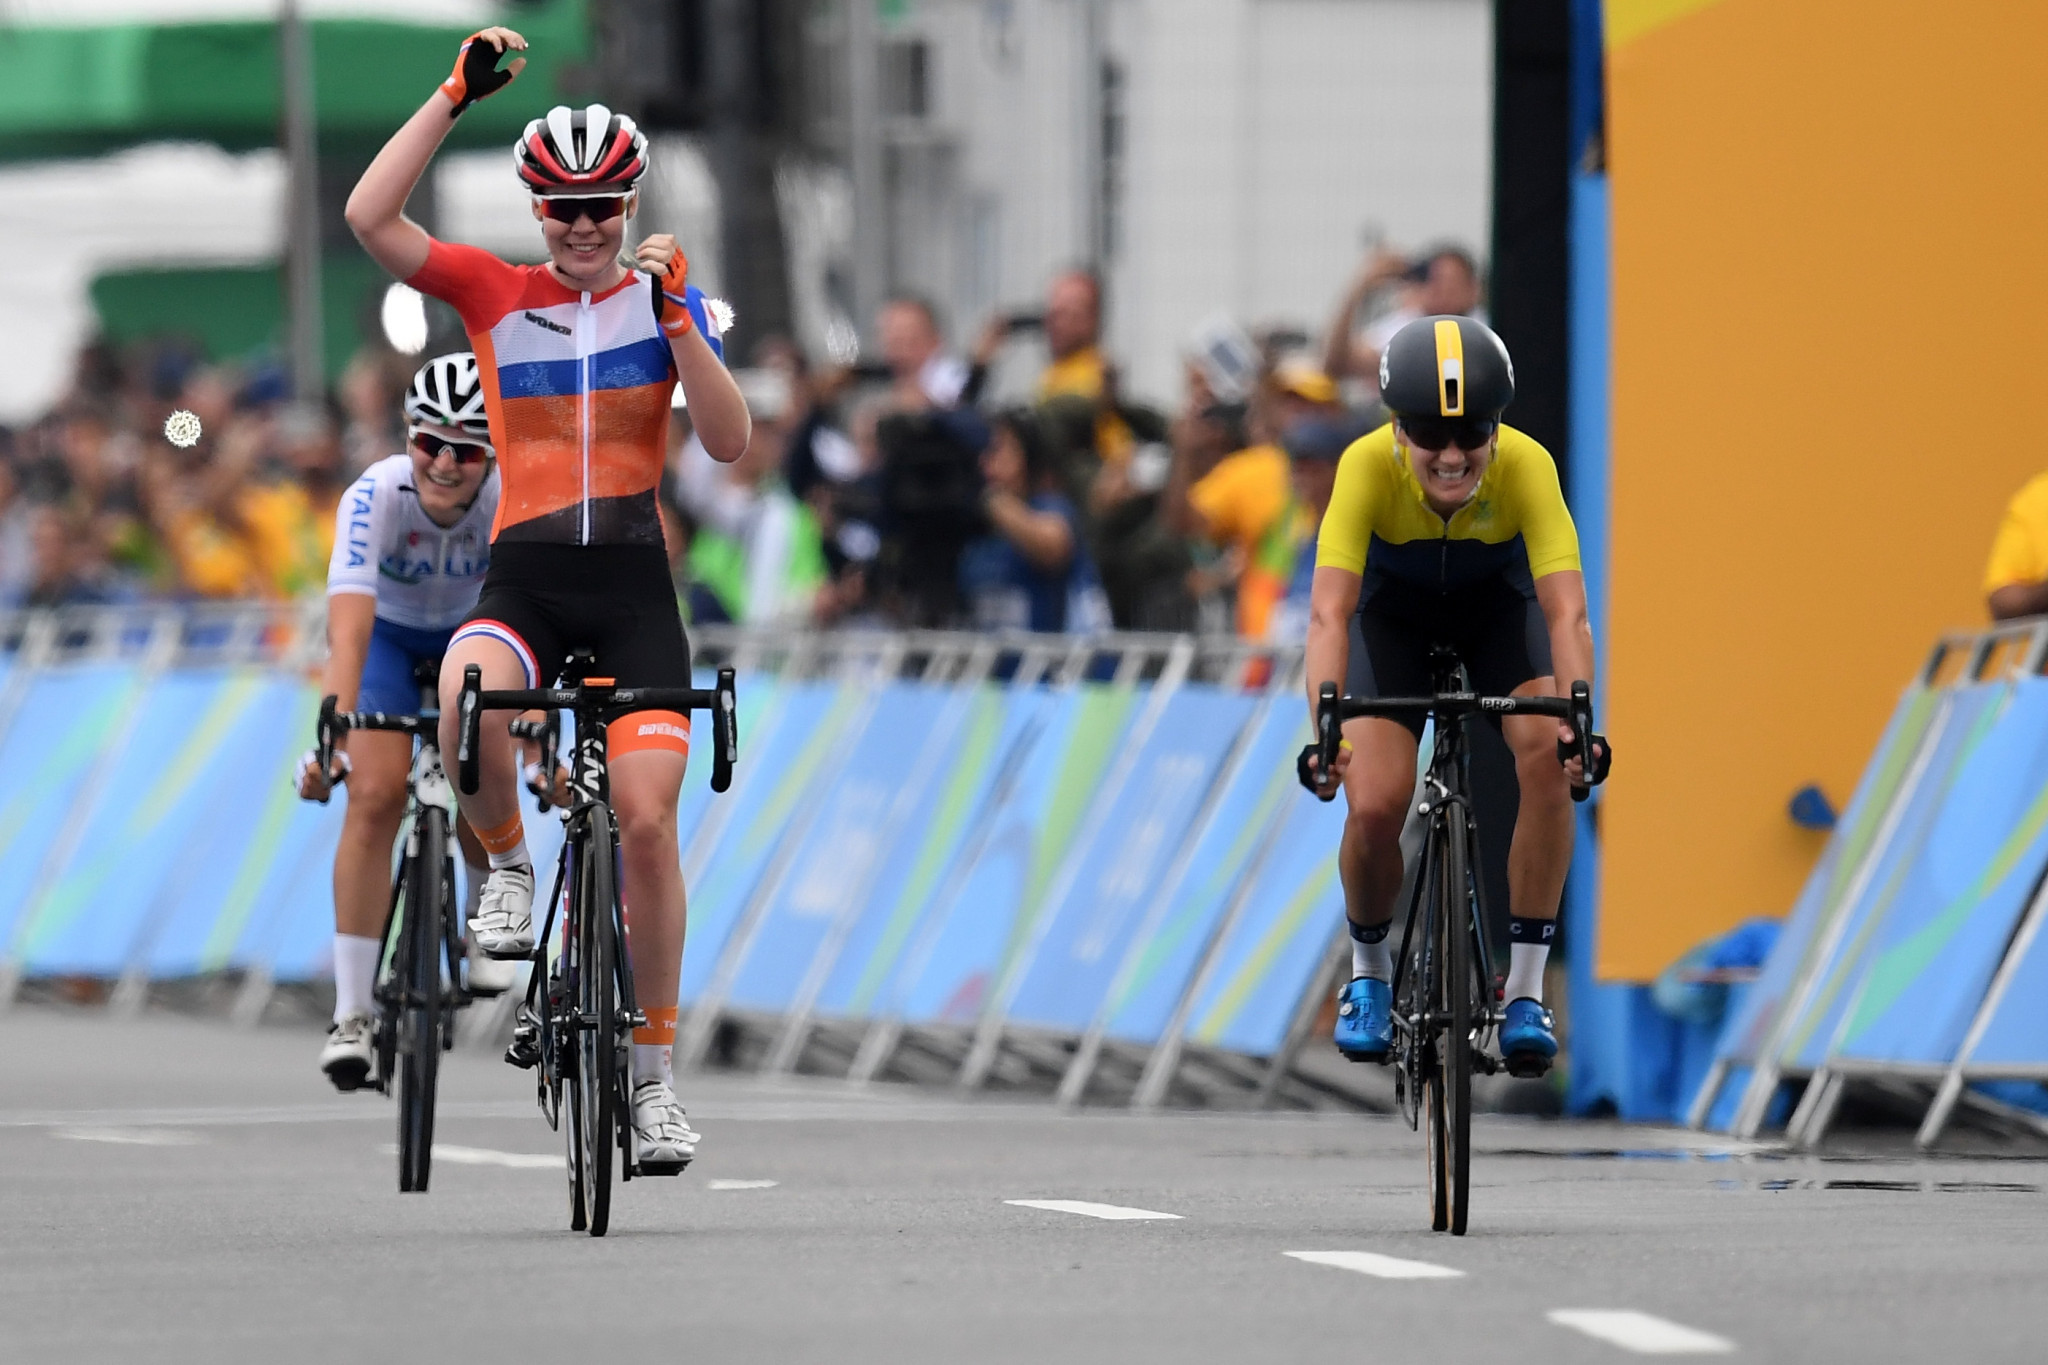 The Netherlands will have a full quota of riders for the women's road race ©Getty Images